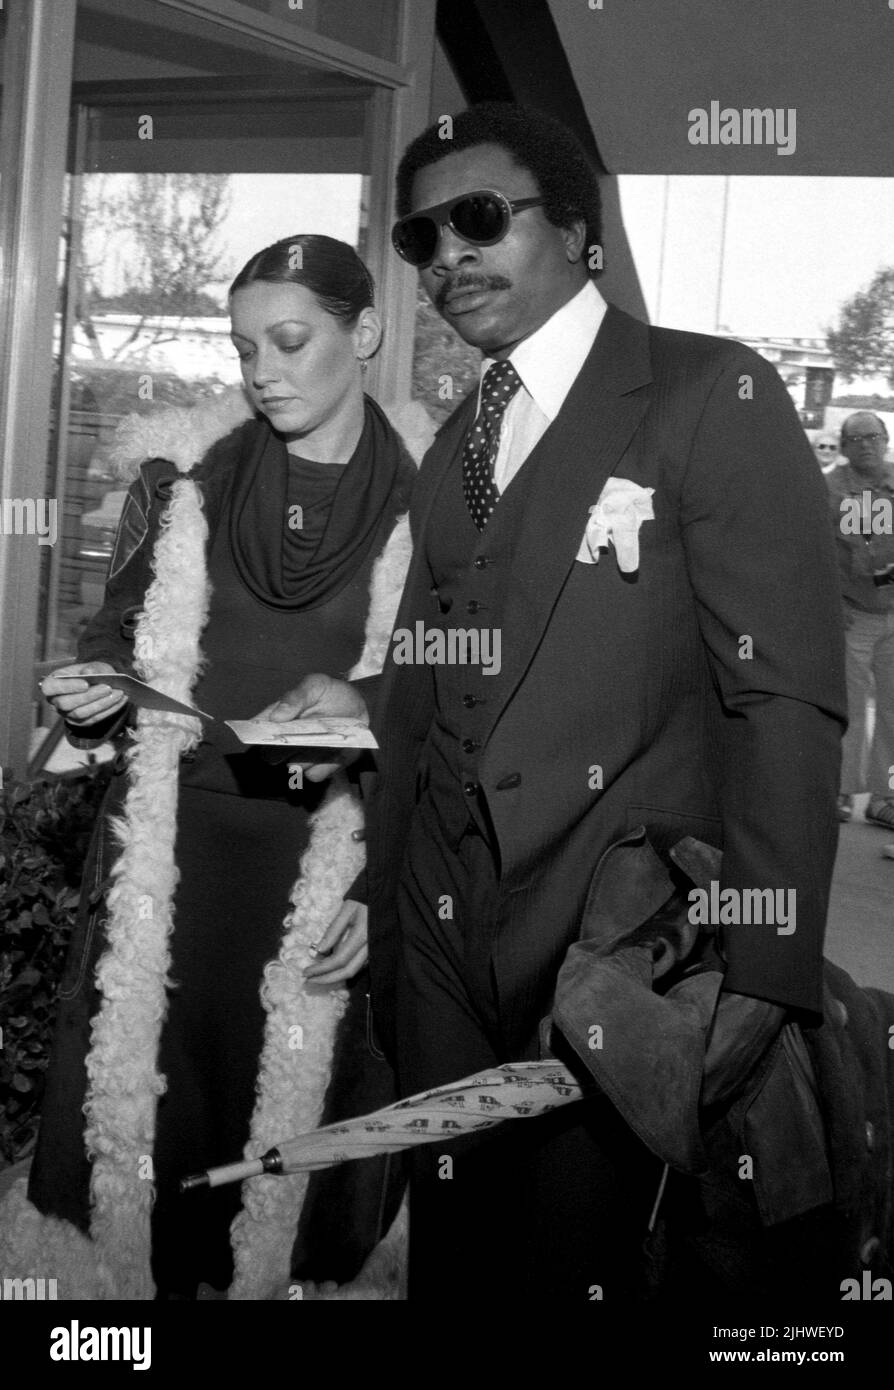 Carl Weathers at the Funeral for David Janssen on February 17, 1980 at Hillside Memorial Park in Los Angeles, California Credit: Ralph Dominguez/MediaPunch Stock Photo